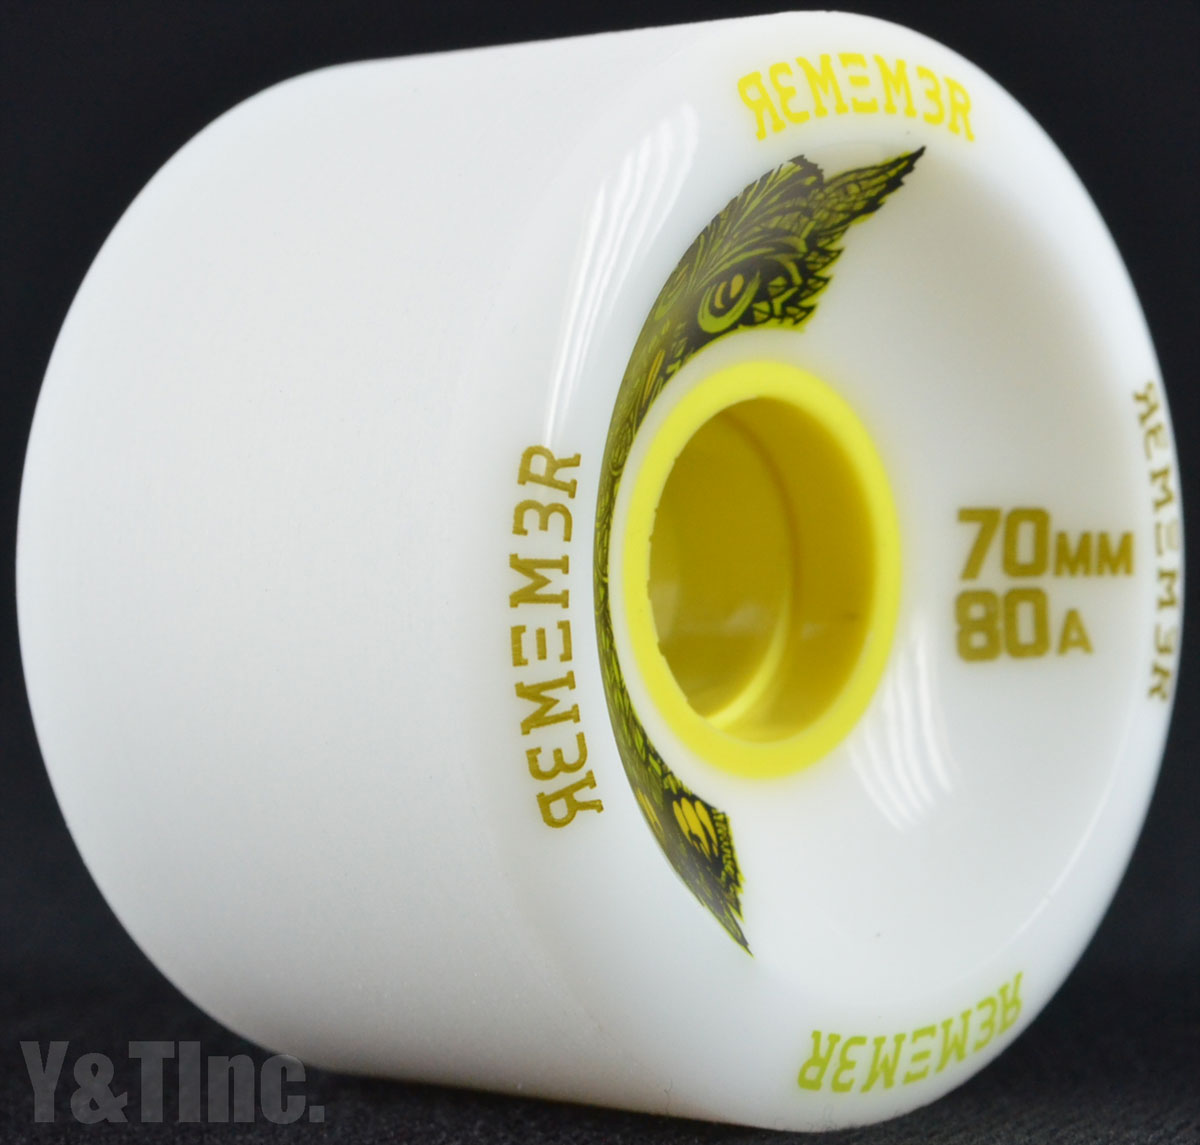 REMEMBER Hoot 70mm 80a White_2